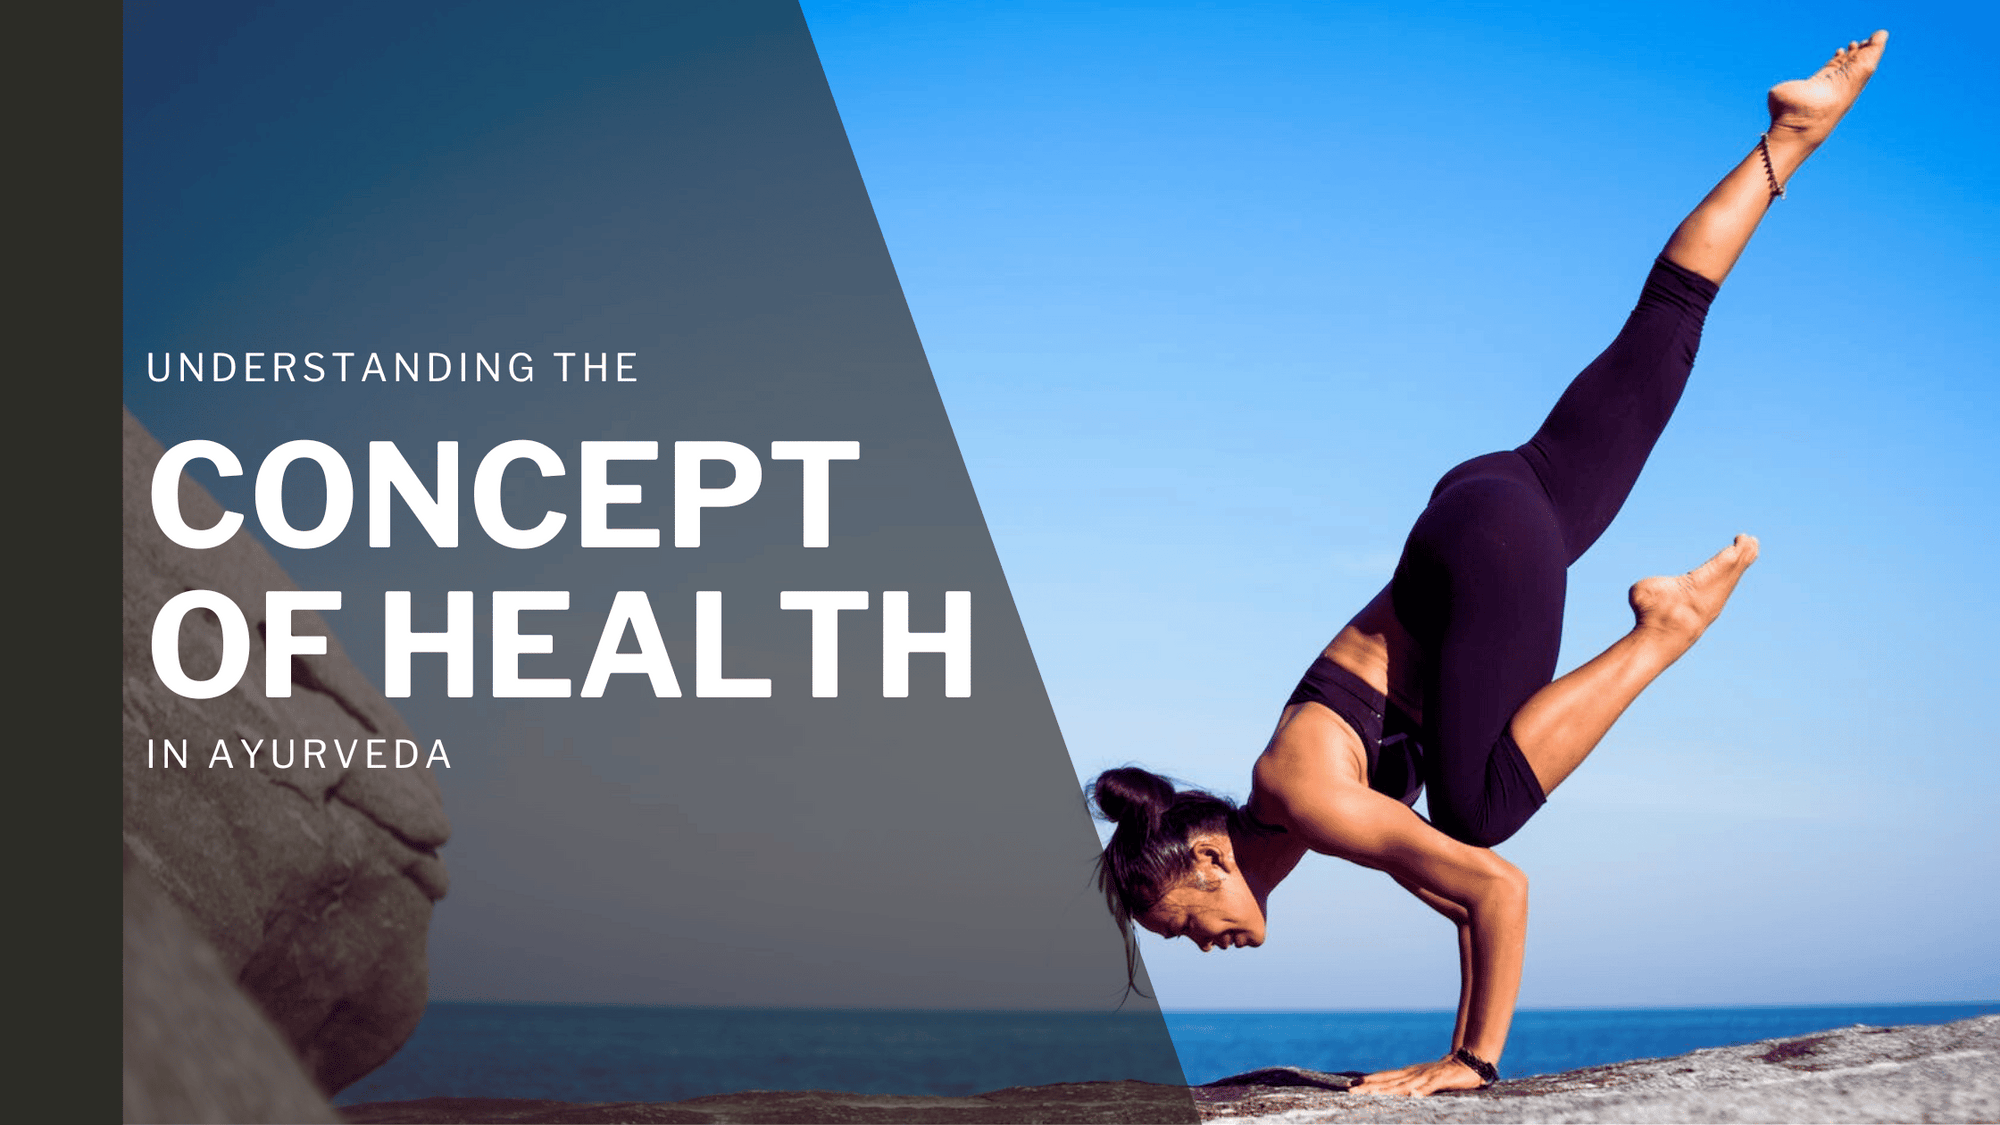 The Concept of Health in Ayurveda